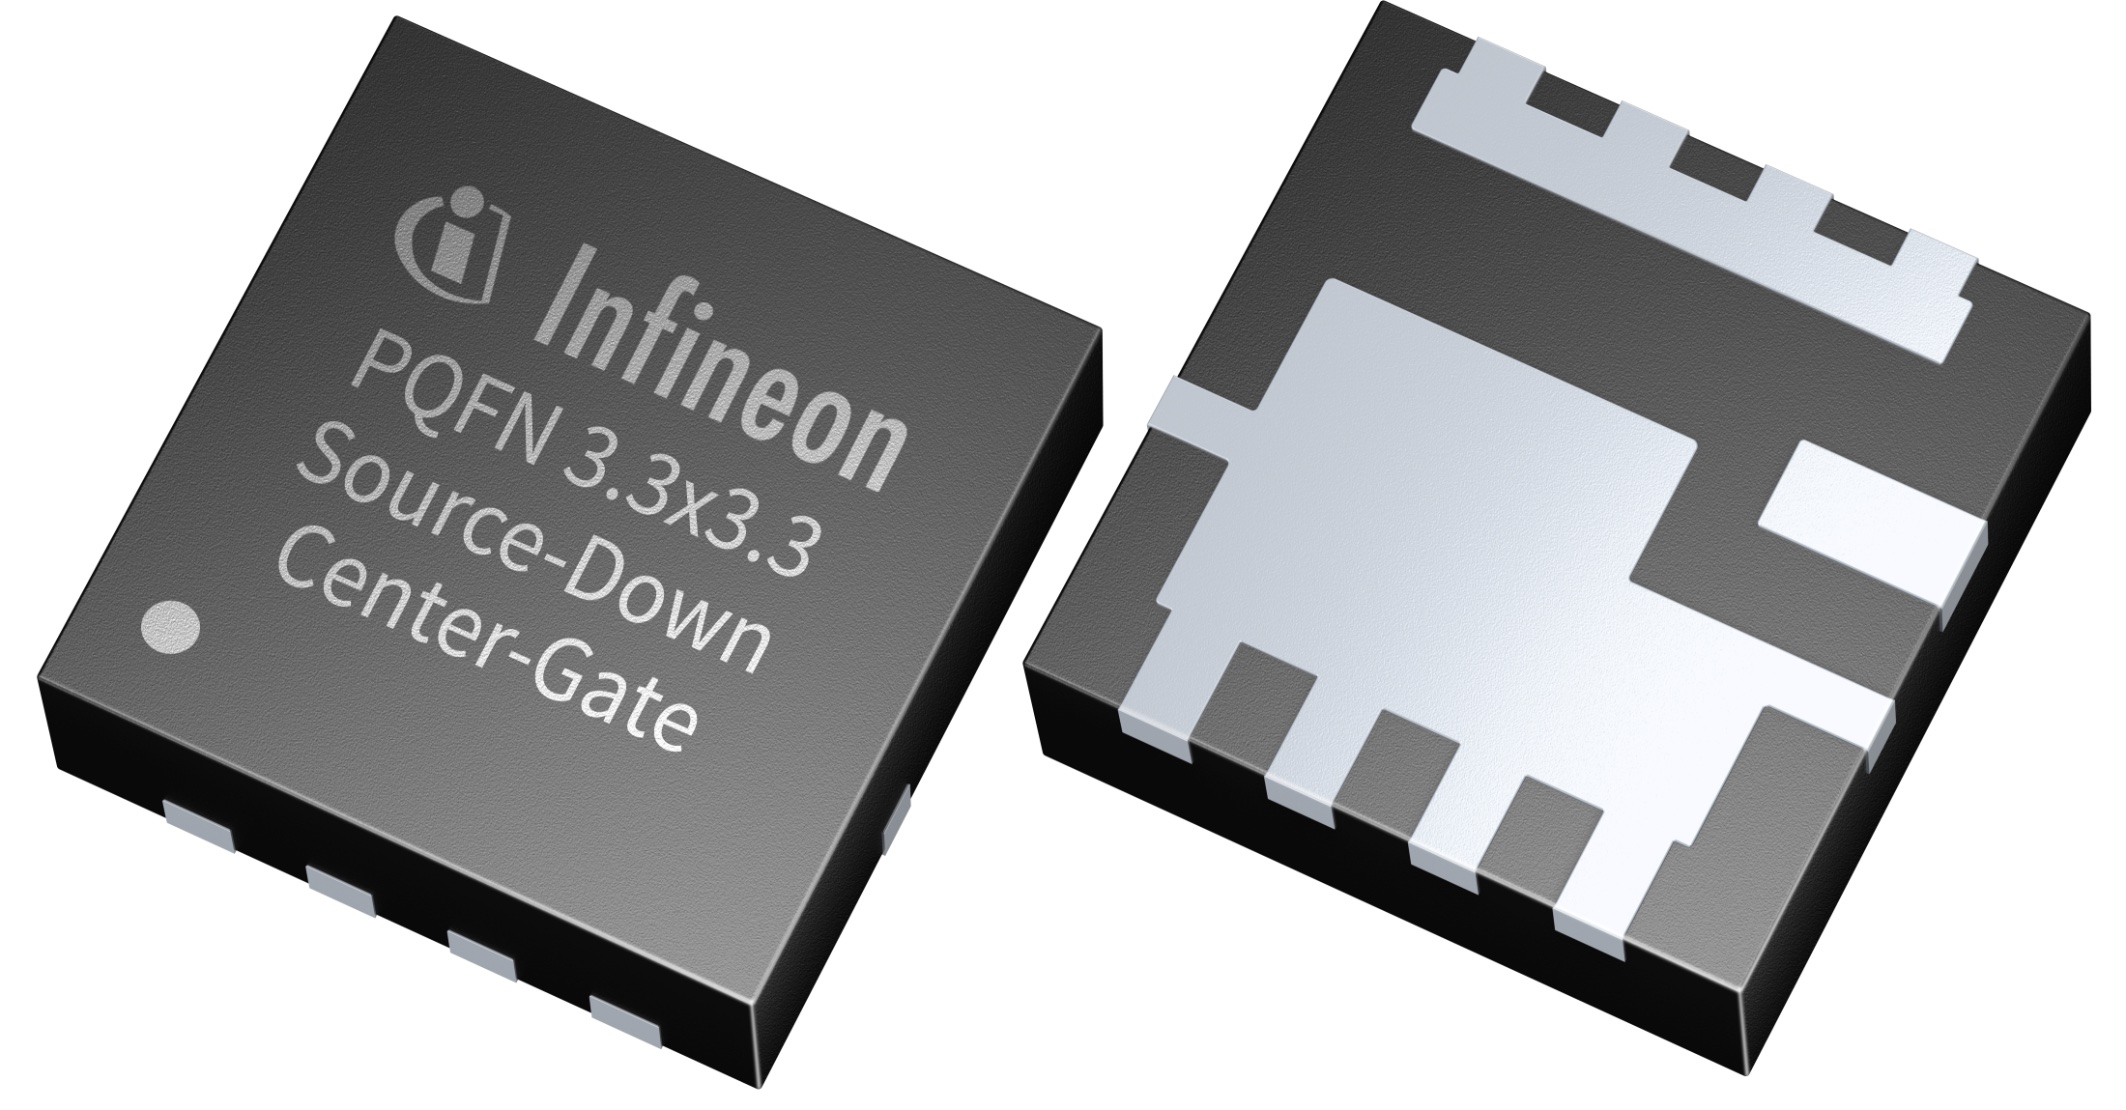 Power MOSFET Package Enables Innovative Source-Down Technology